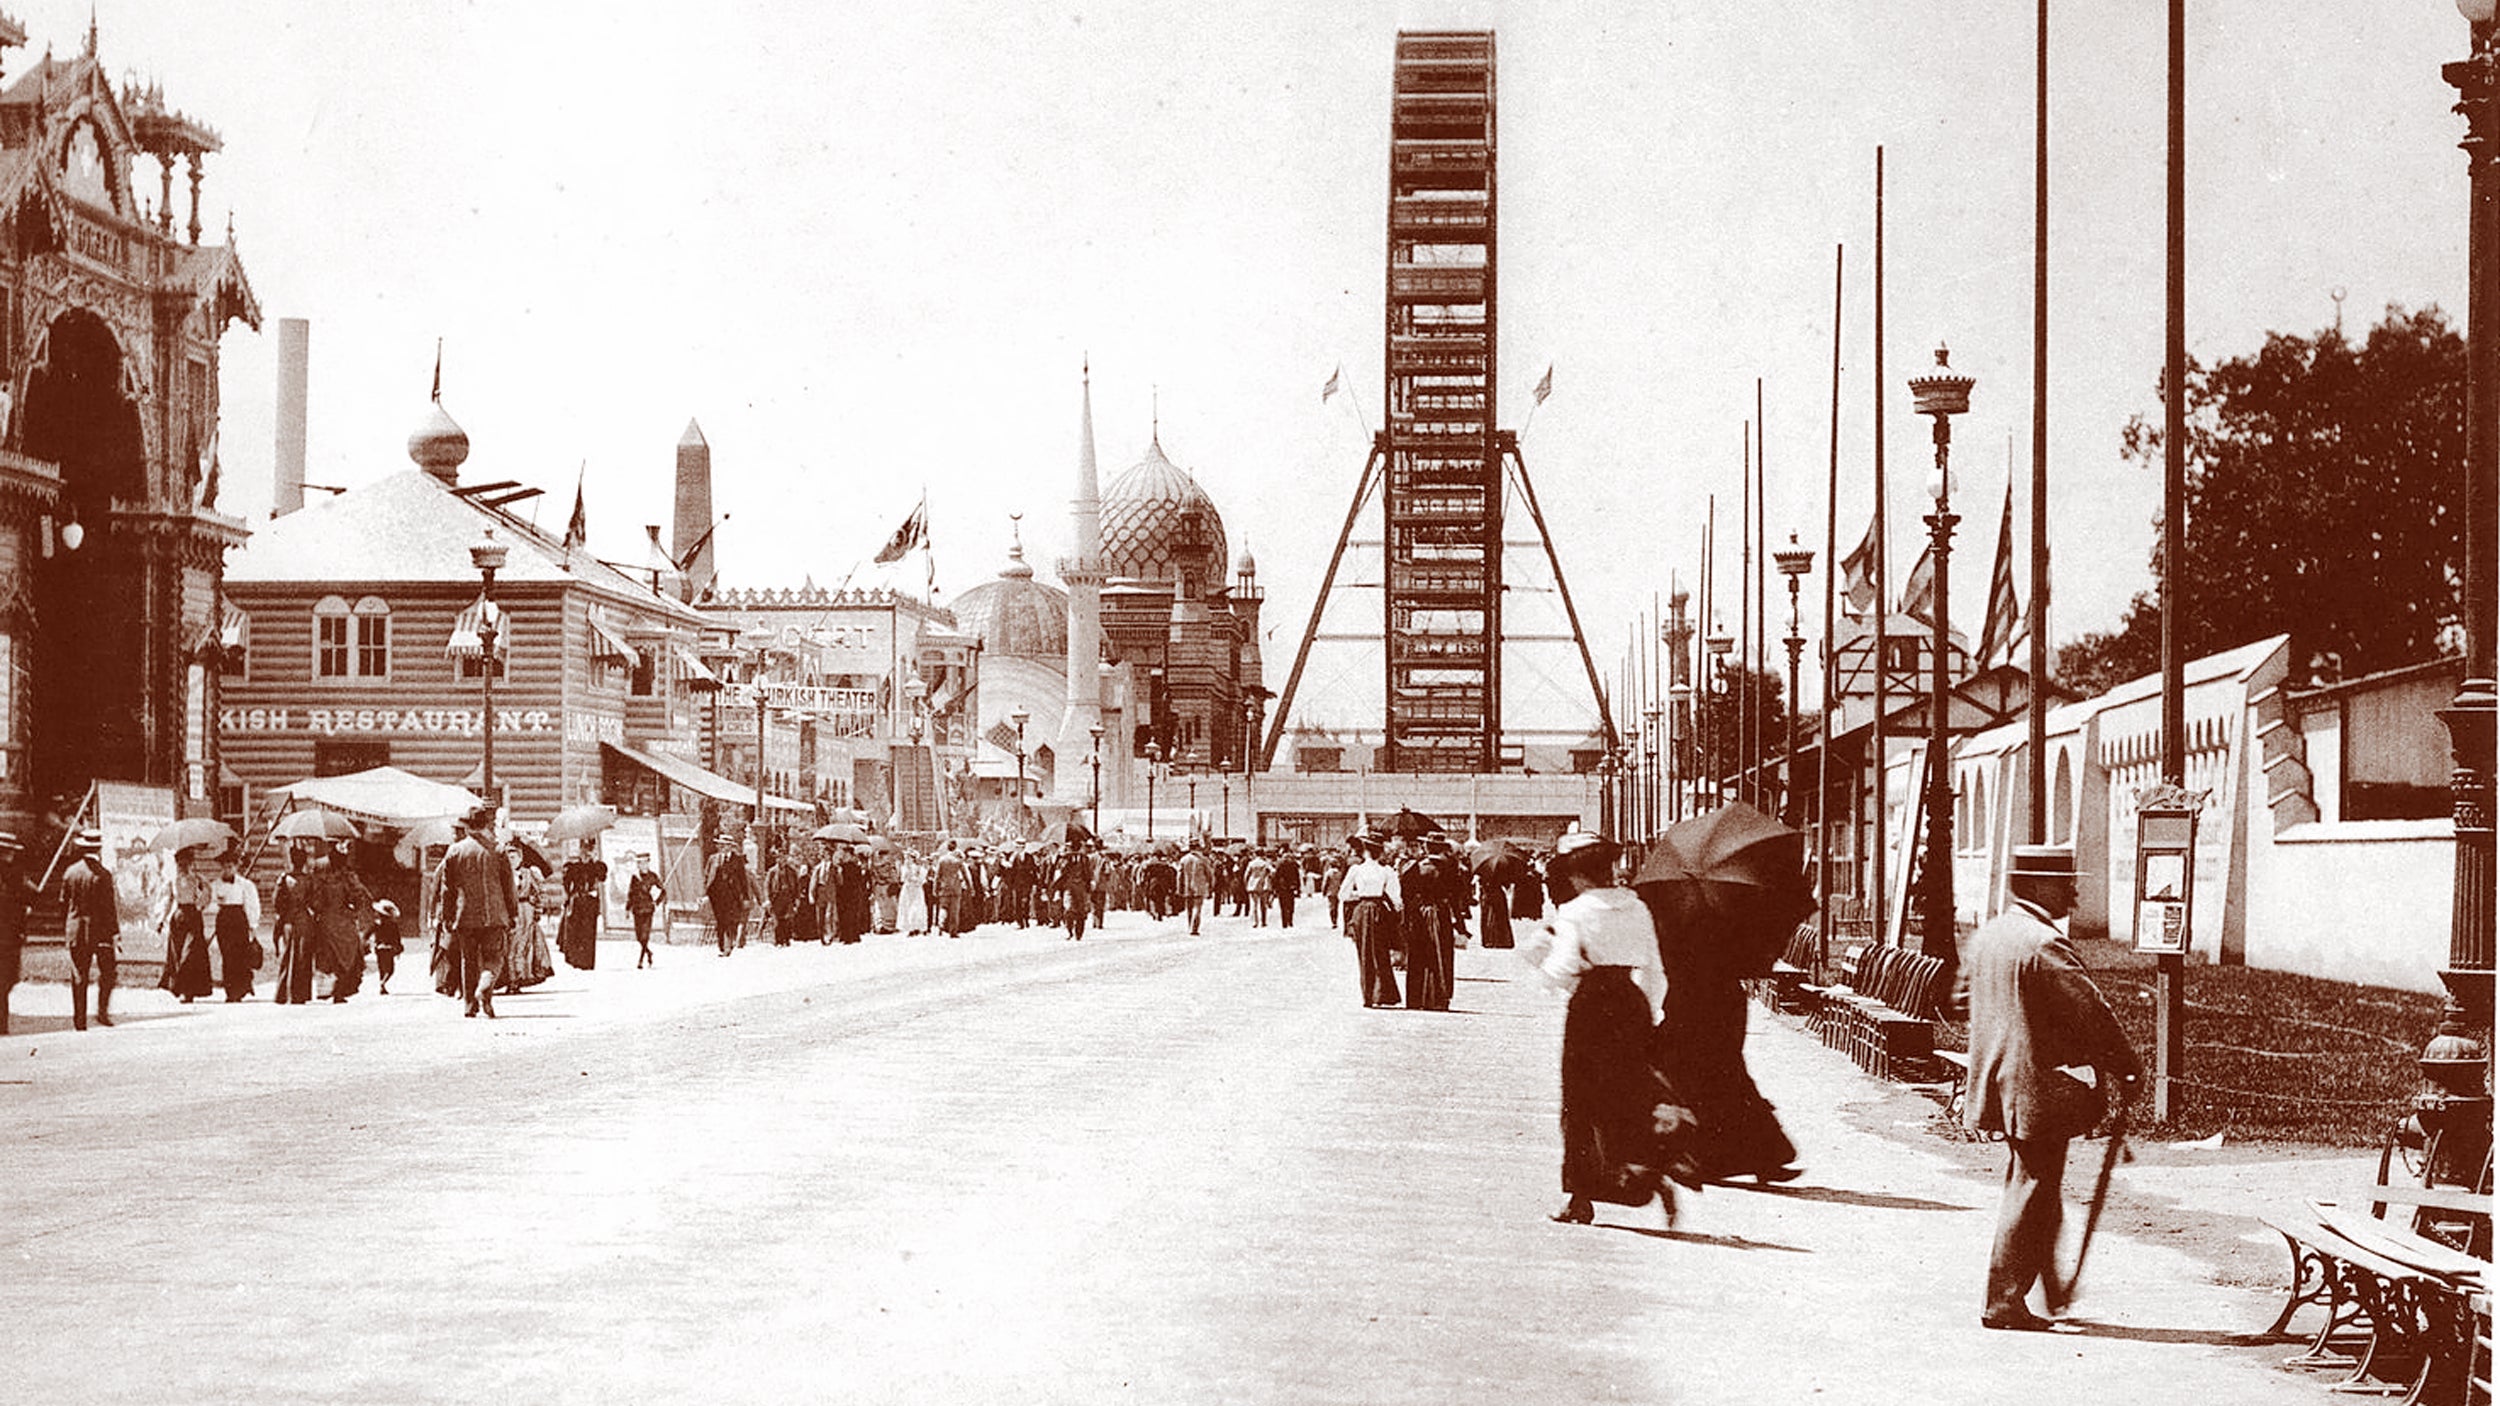 Midway at the Chicago World's Fair of 1893.